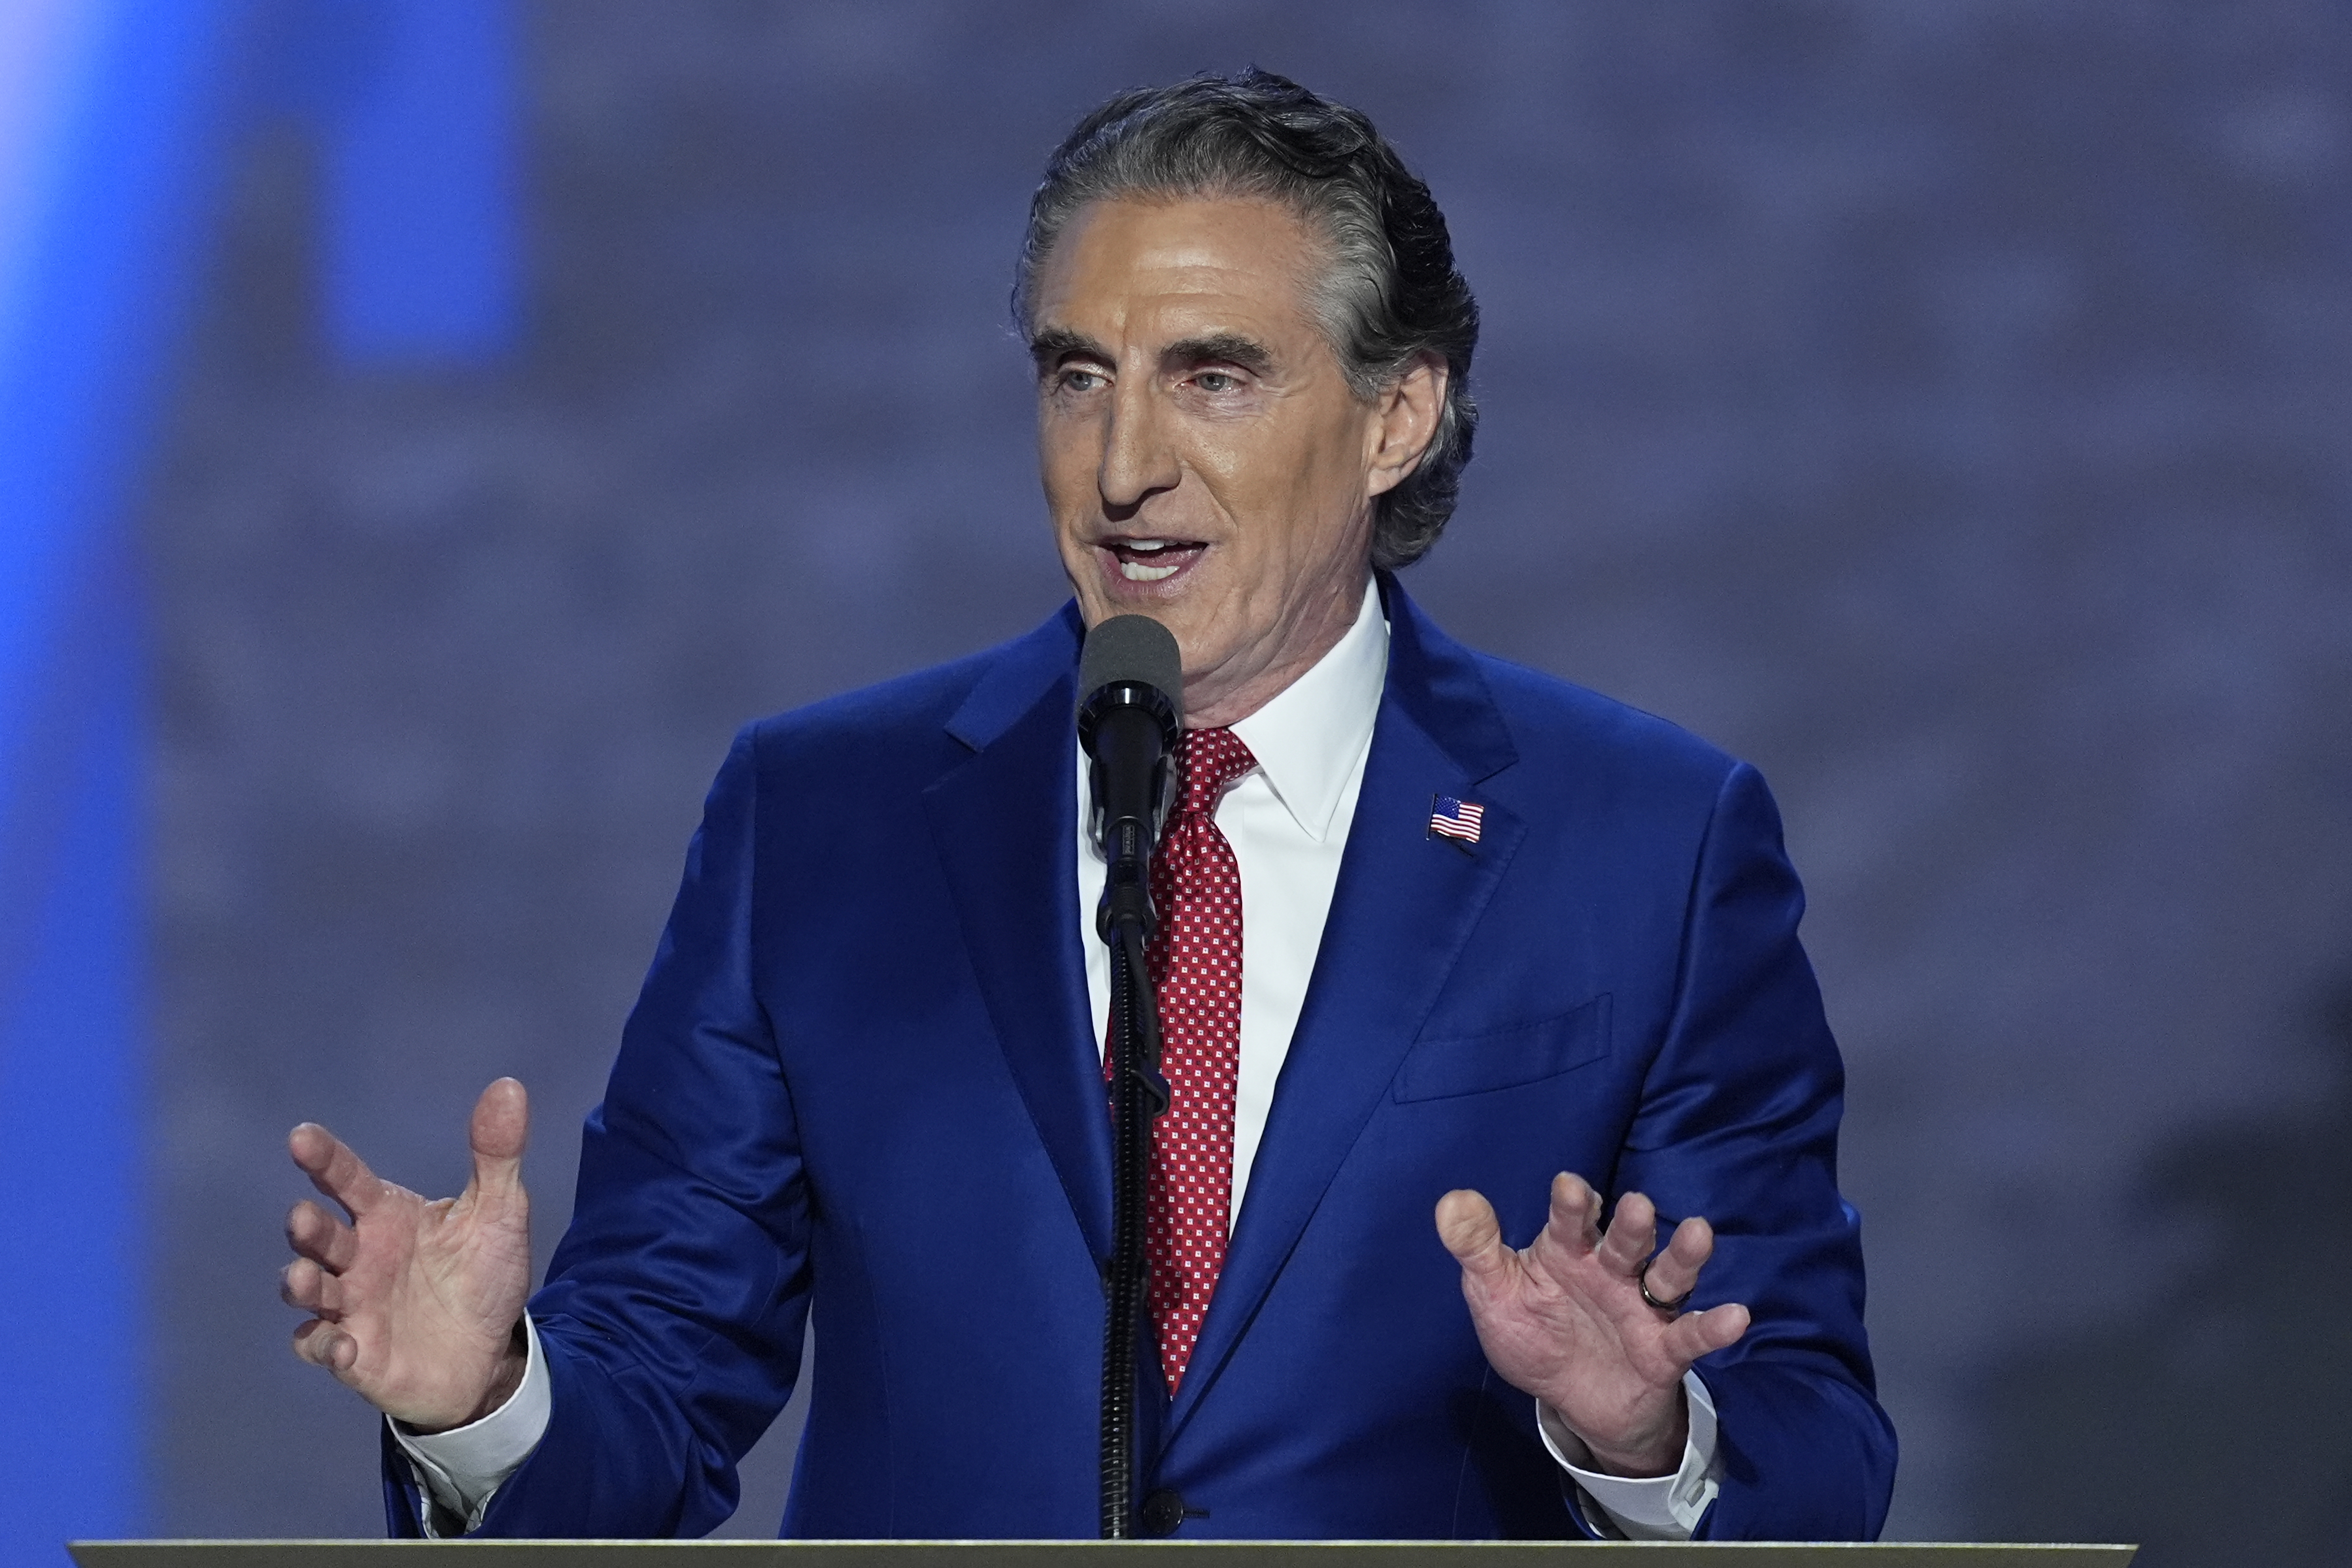 Gov. Doug Burgum, R-ND., speaks during the Republican National Convention on Wednesday, July 17, 2024, in Milwaukee. (AP Photo/J. Scott Applewhite)